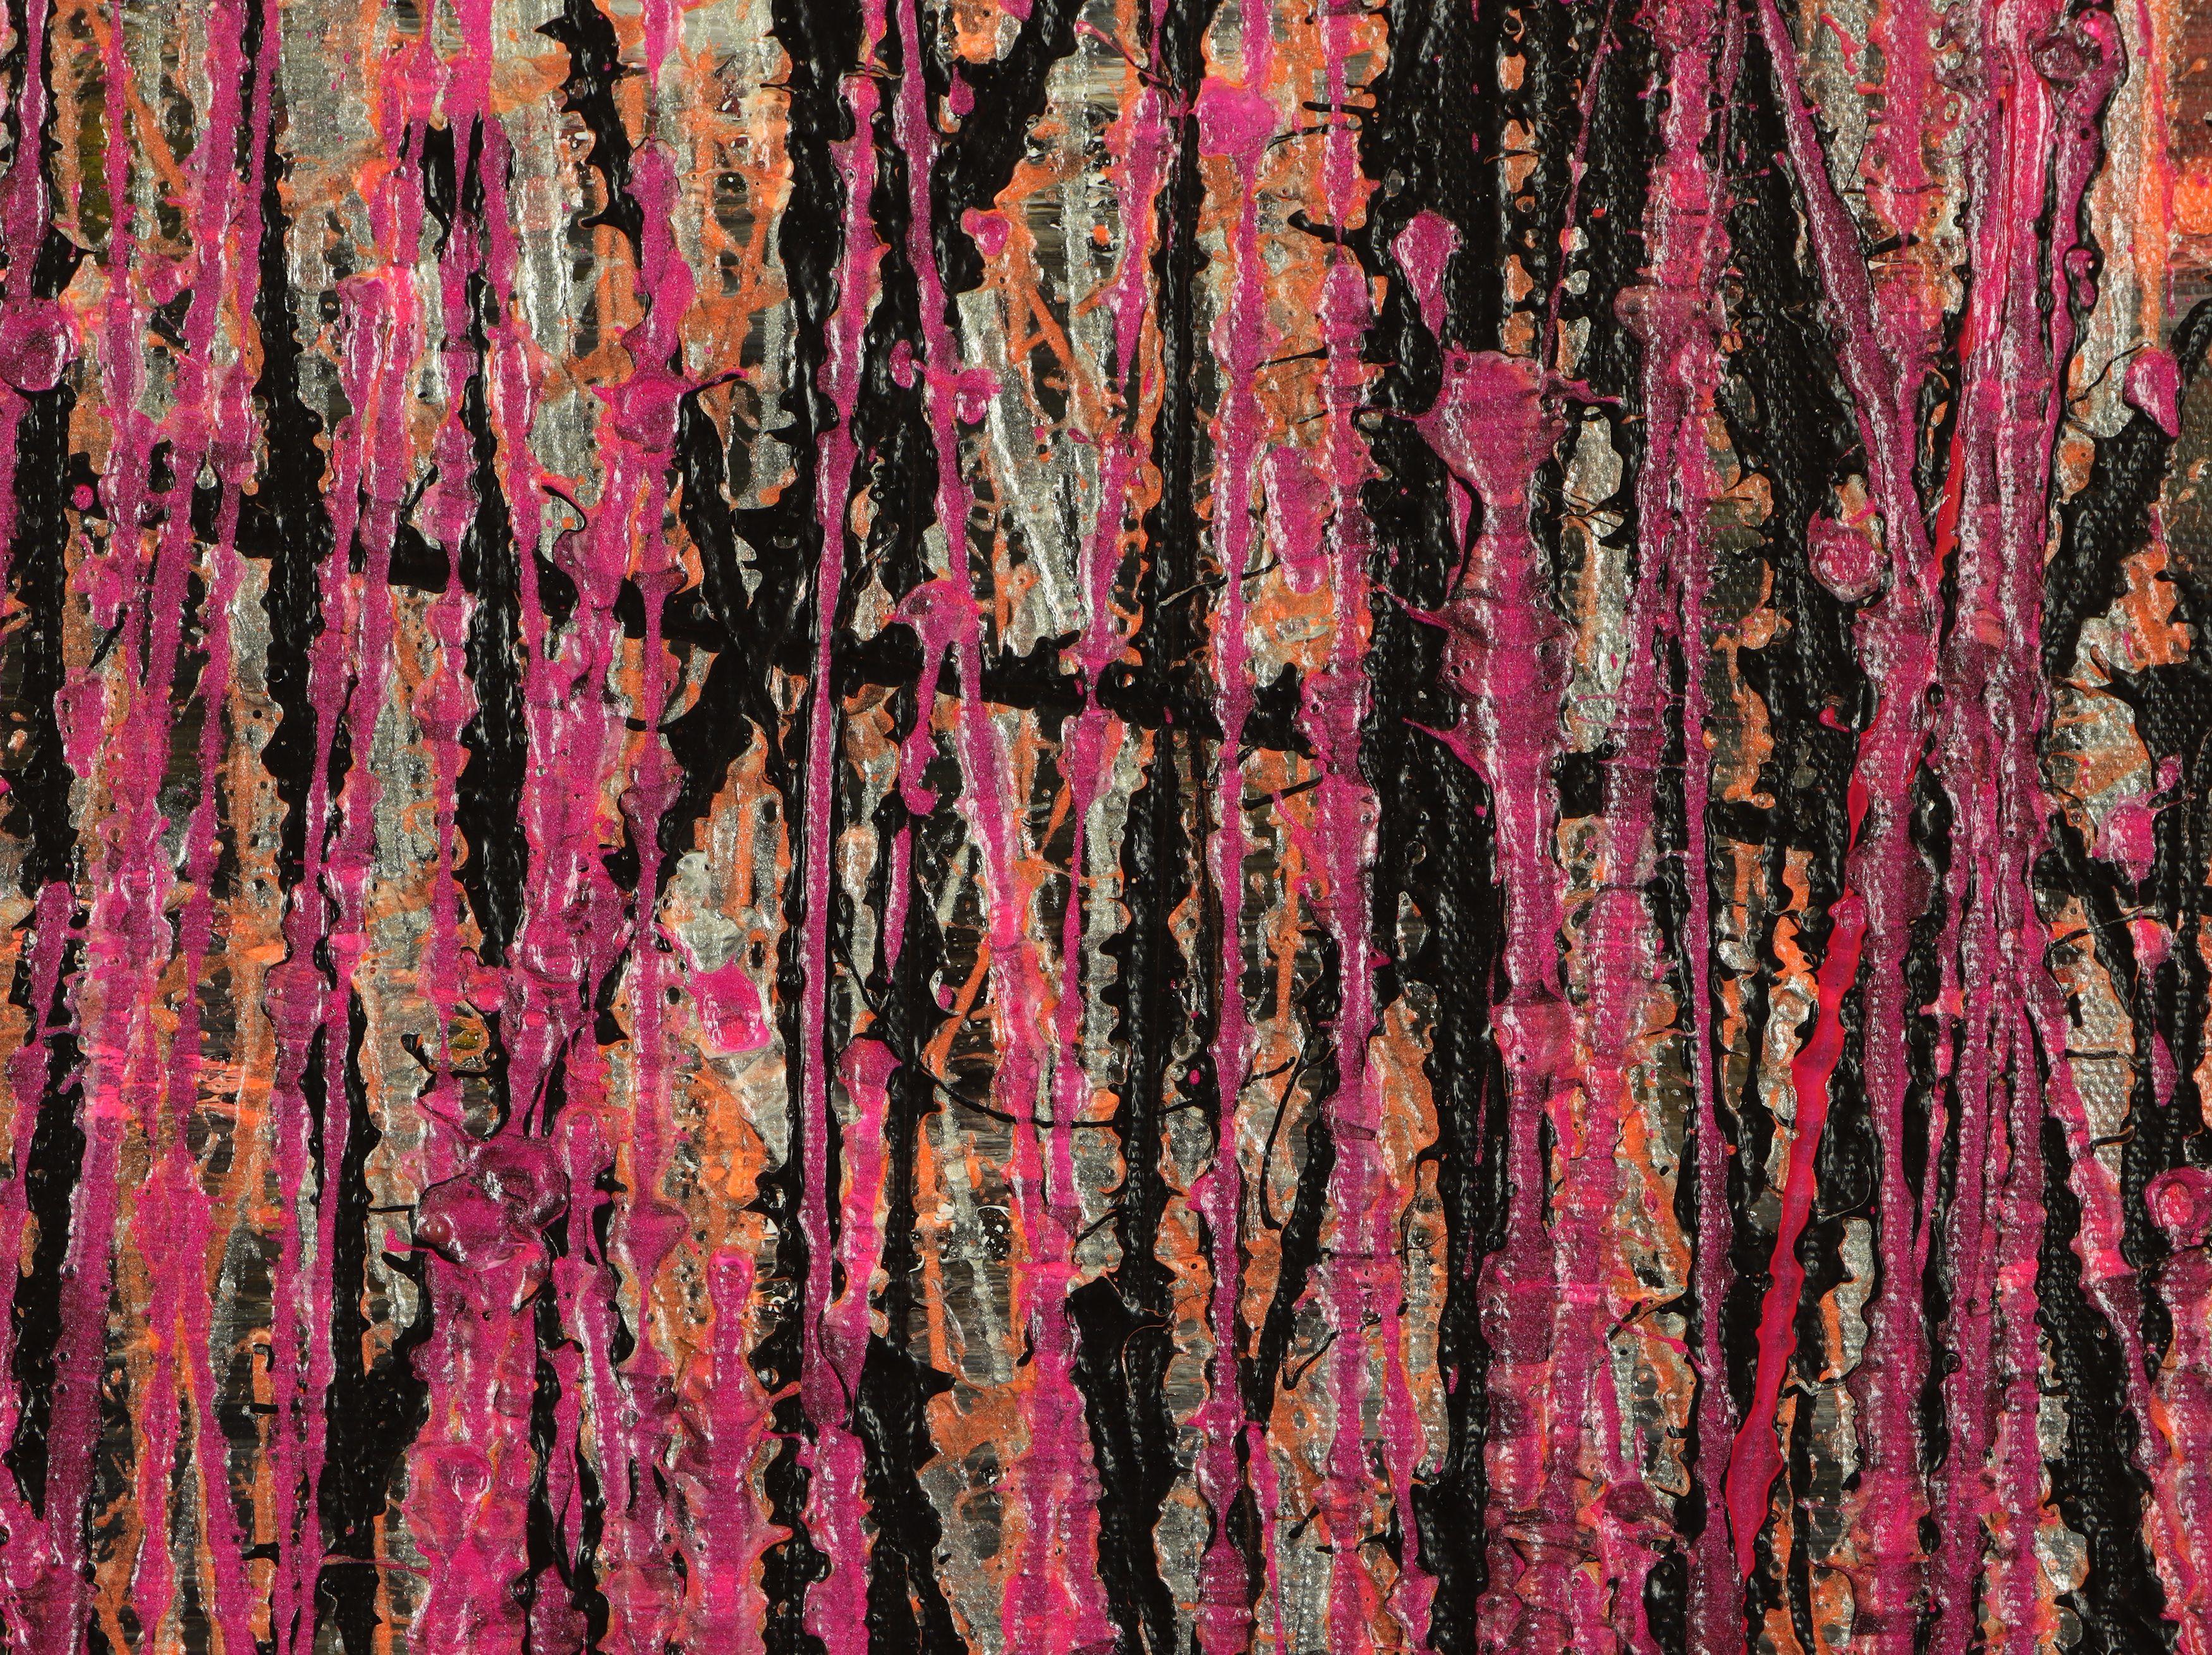 Sudden pink storm, Painting, Acrylic on Canvas - Brown Abstract Painting by Nestor Toro